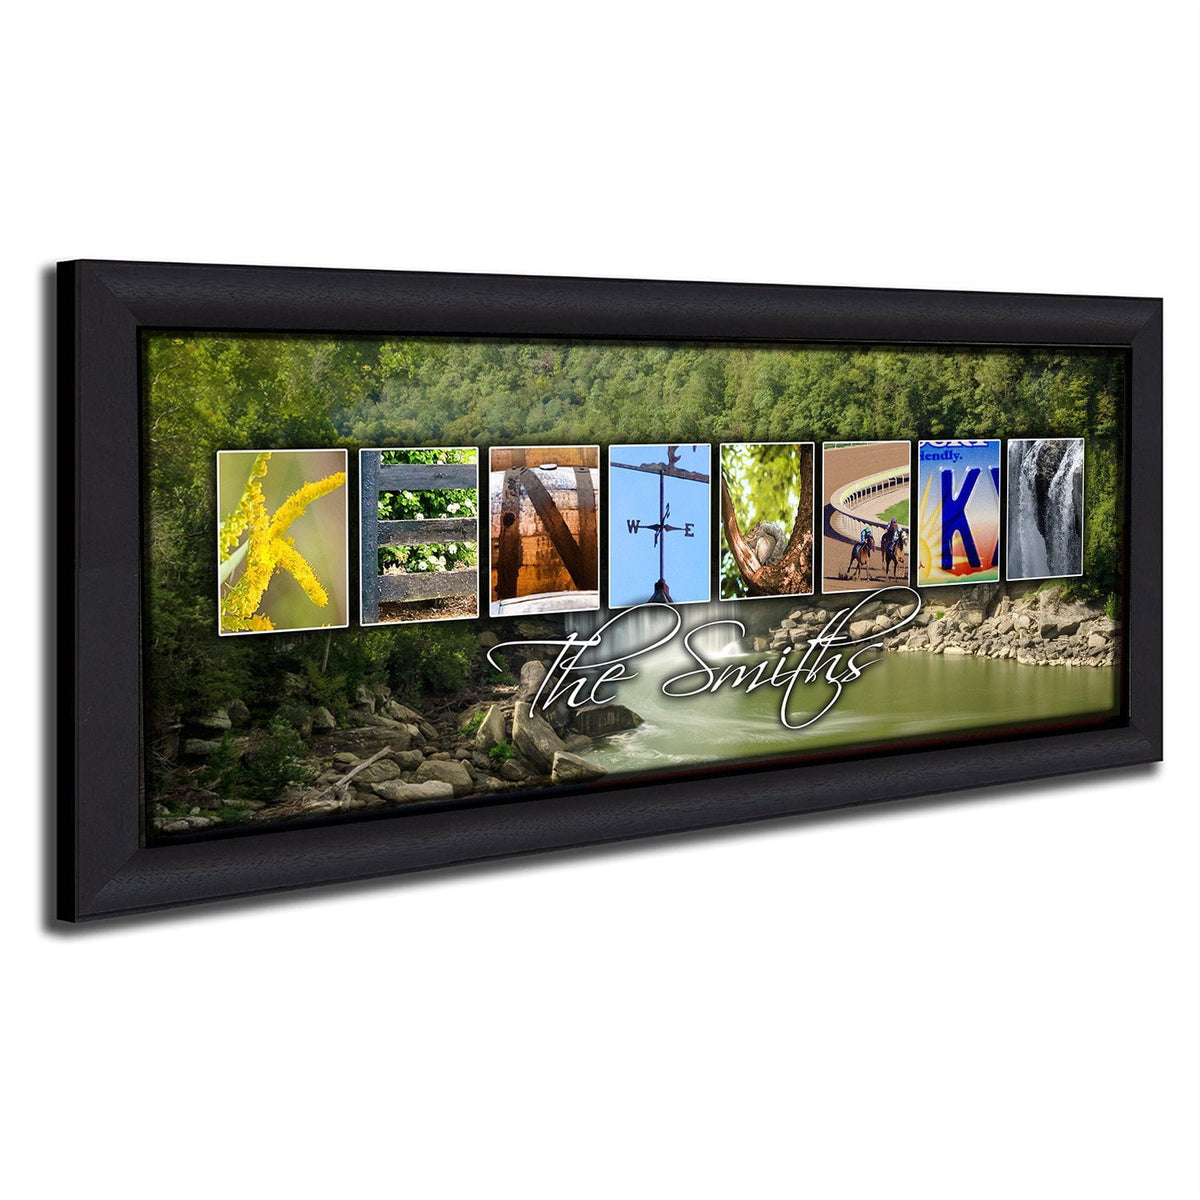 Personalized Kentucky gift framed art canvas from Personal Prints